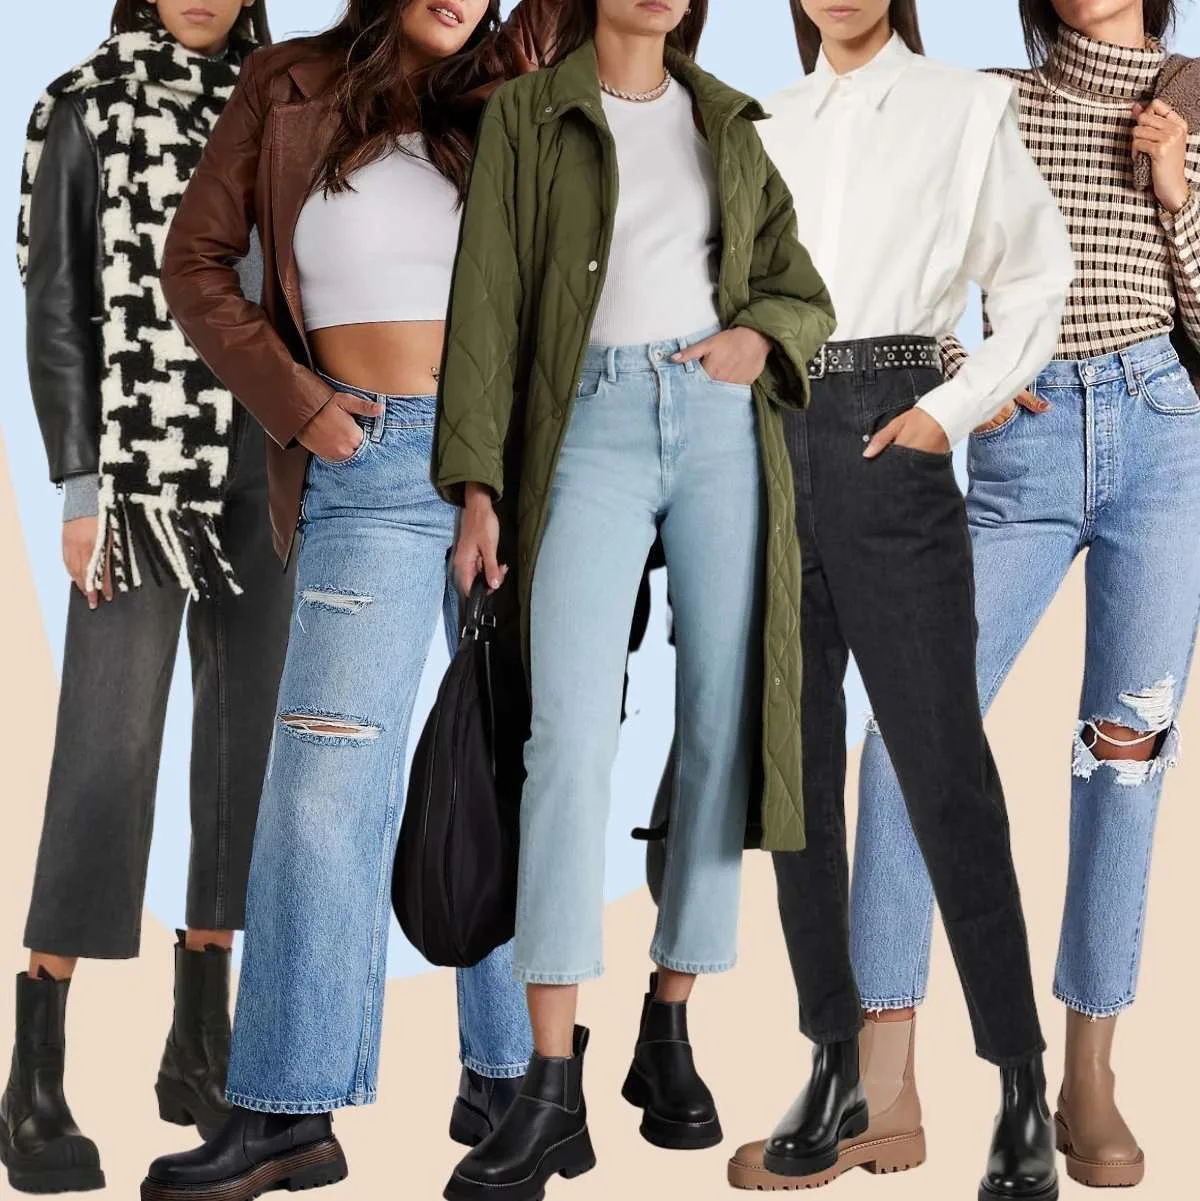 Collage of 5 women wearing chelsea boots with jeans outfits.